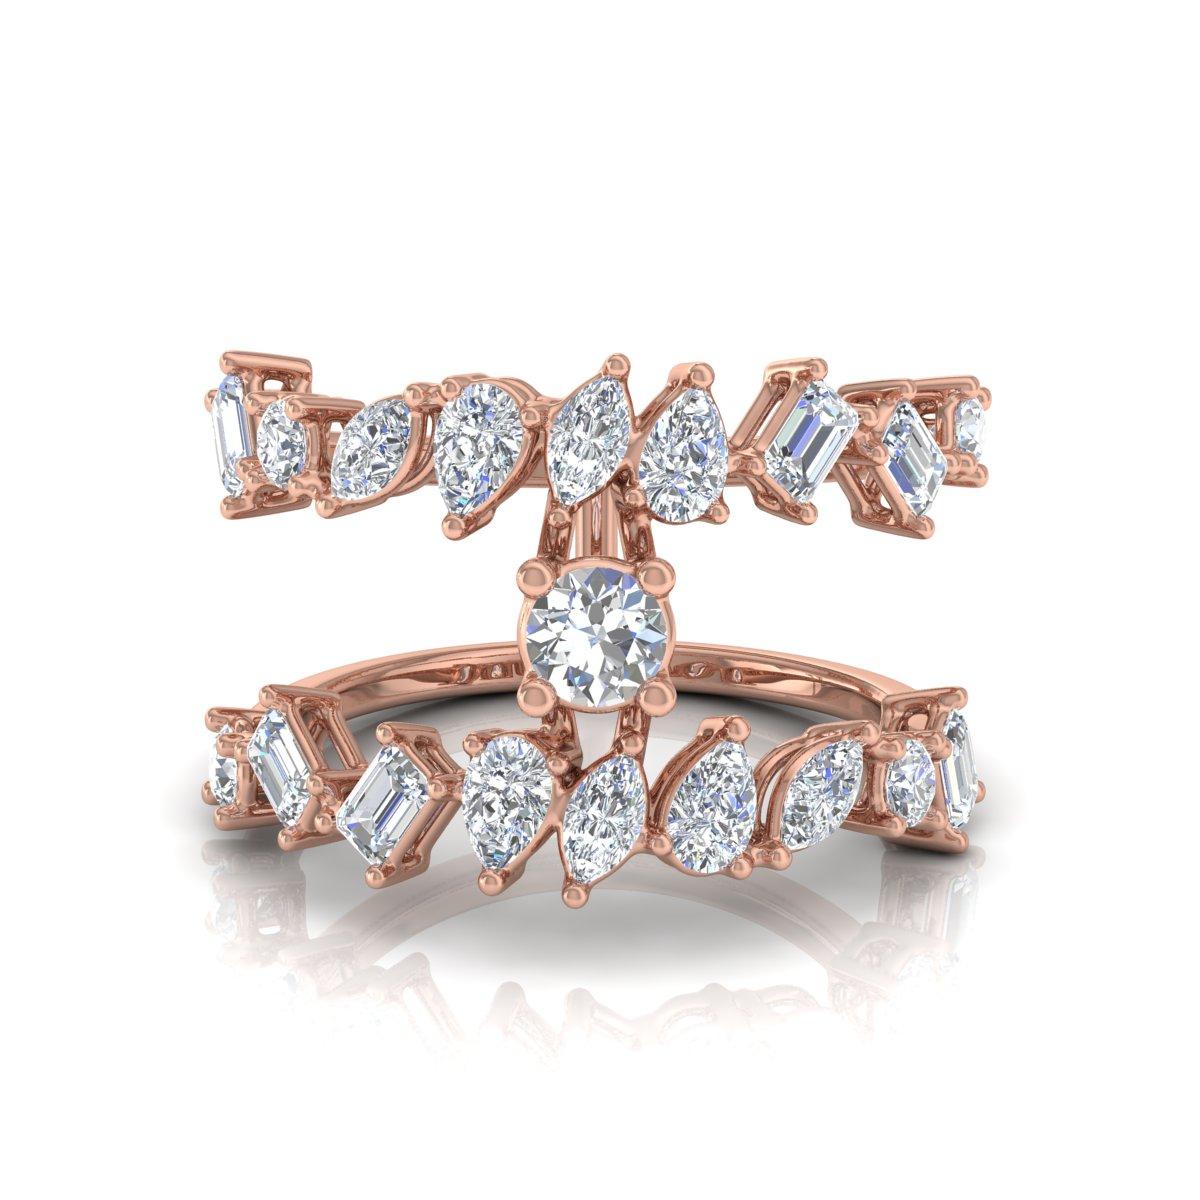 For Sale:  2.35 Carat SI Clarity HI Color Diamond Designer Ring Solid 18k Rose Gold Jewelry 6